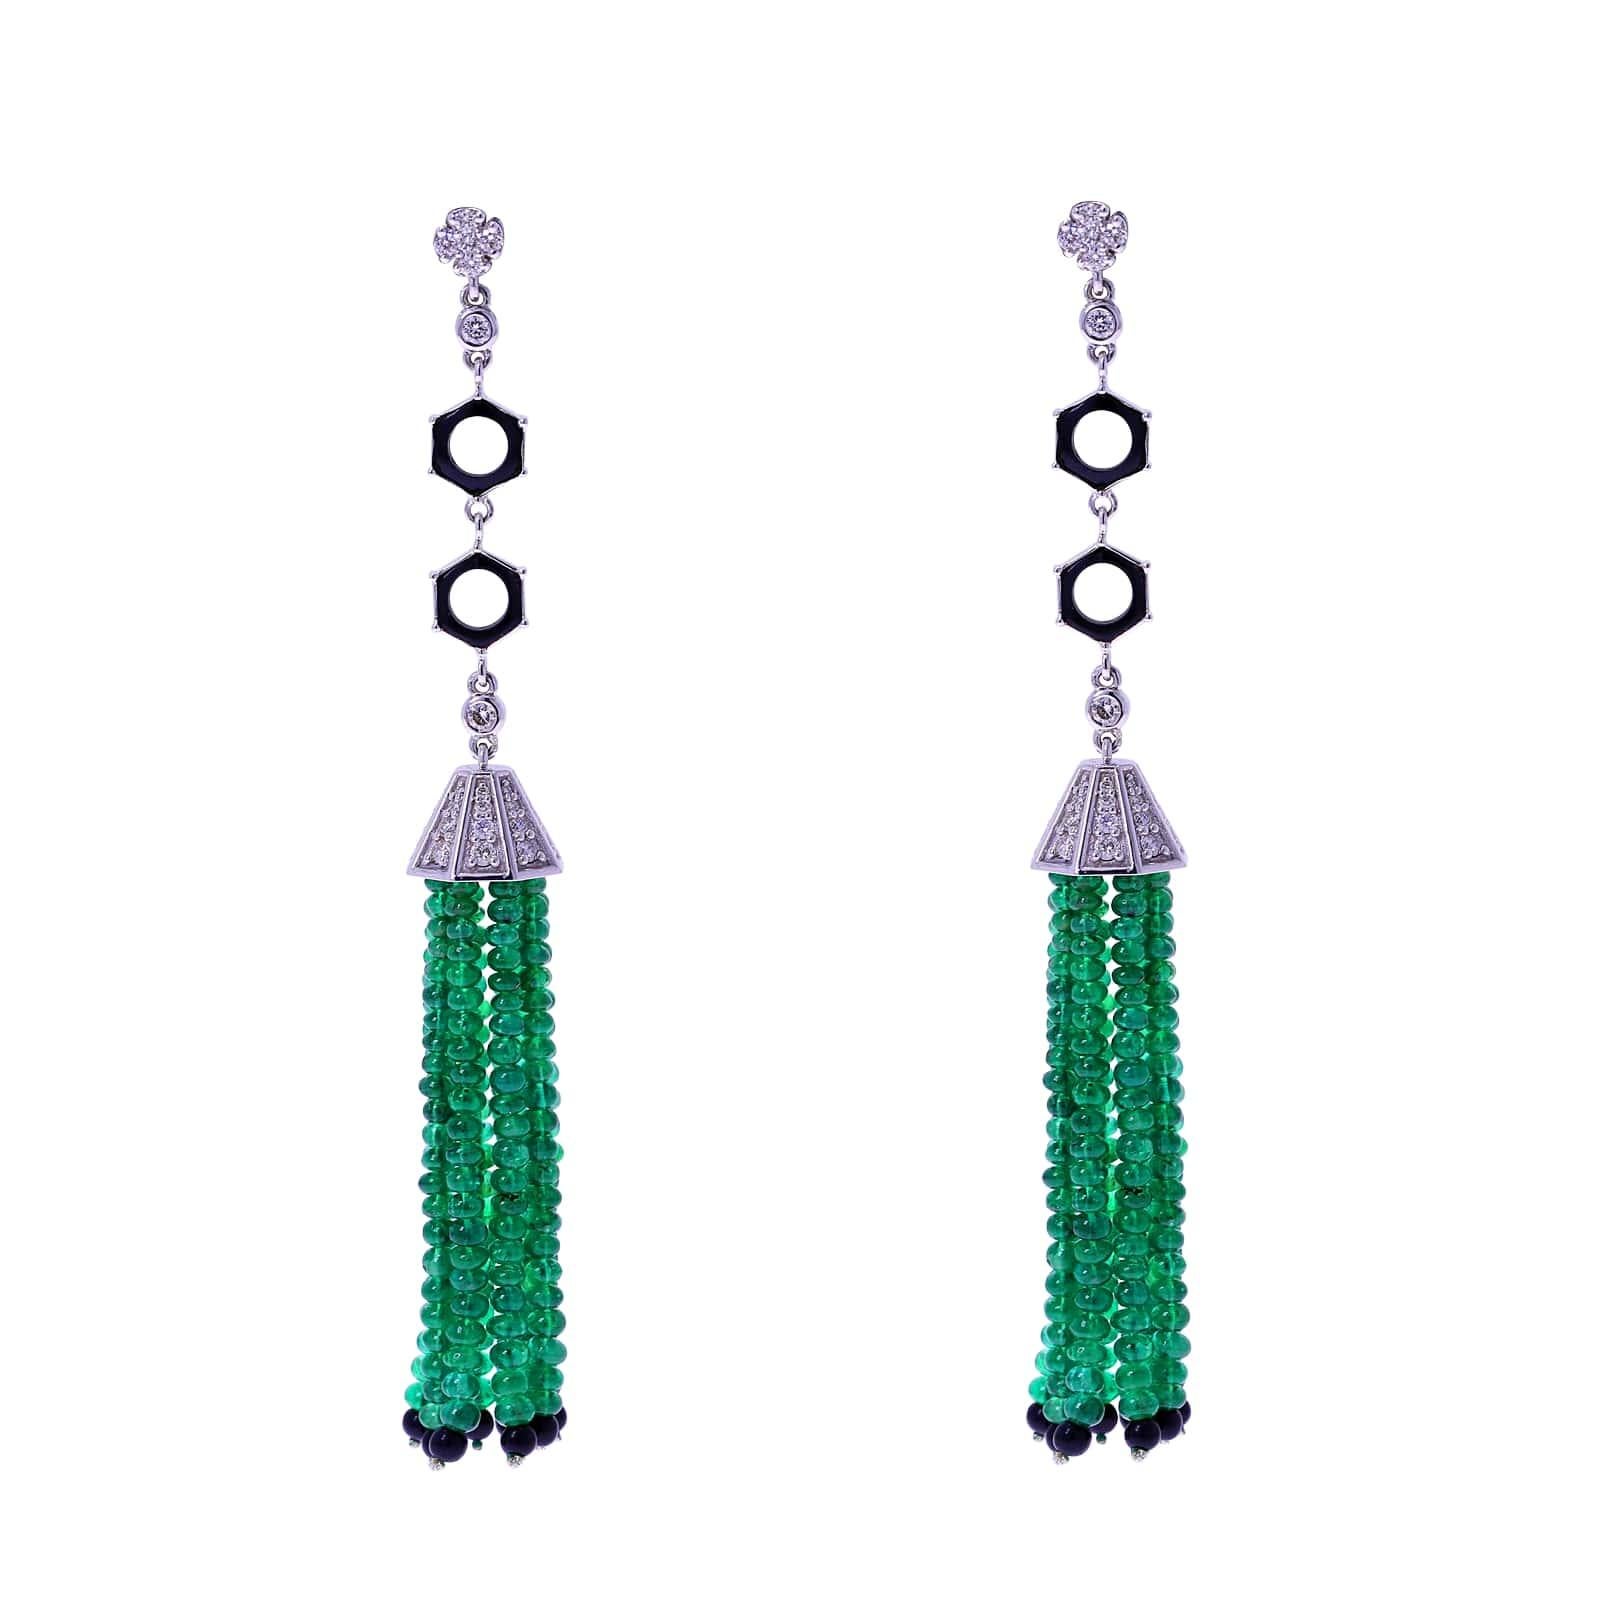 A beautiful work of art with Emerald Bead Tassels with Diamonds and Onyx. There are 44.16 cts. of Emeralds, 3.93 cts. of Onyx, and 1.50 cts. of Diamonds. The earrings weighs 20.20 grams.